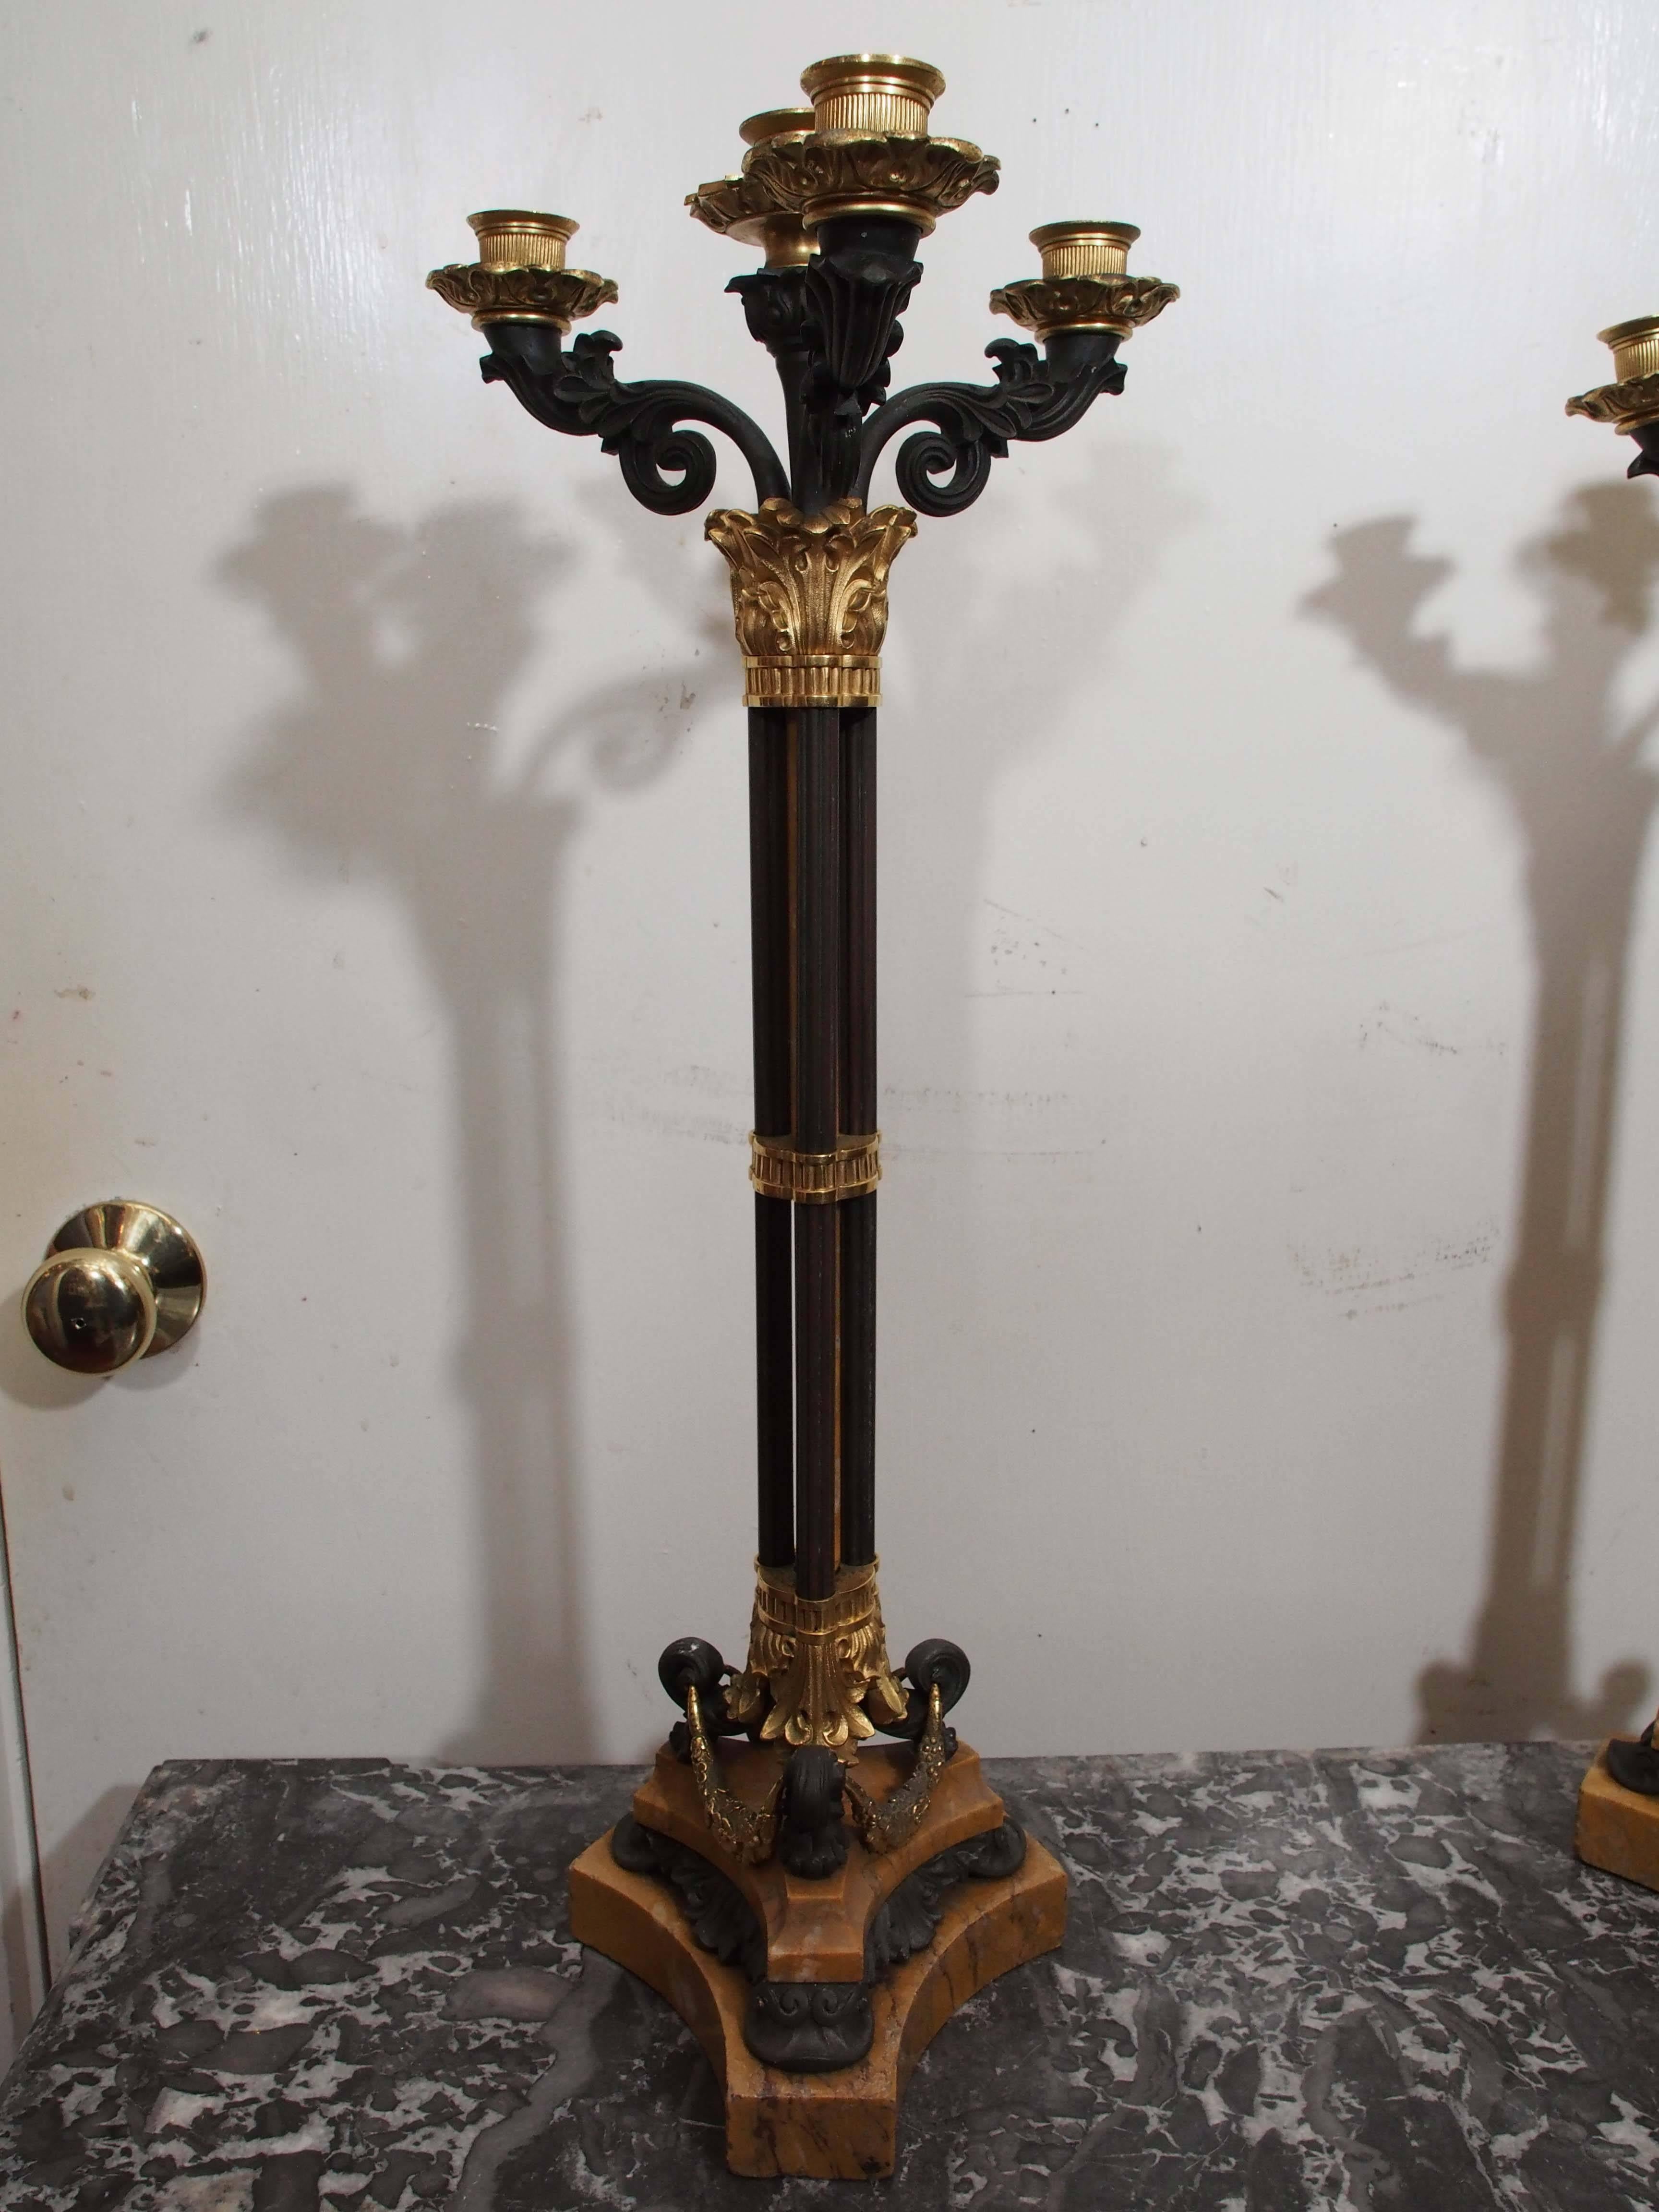 Pair of patinated and gilt bronze / Sienna marble Charles X four-light candelabra.
The cluster column central stem is three patinated columns banded with gilt bronze and having a central sienna column being surrounded. All on animalier legs on a